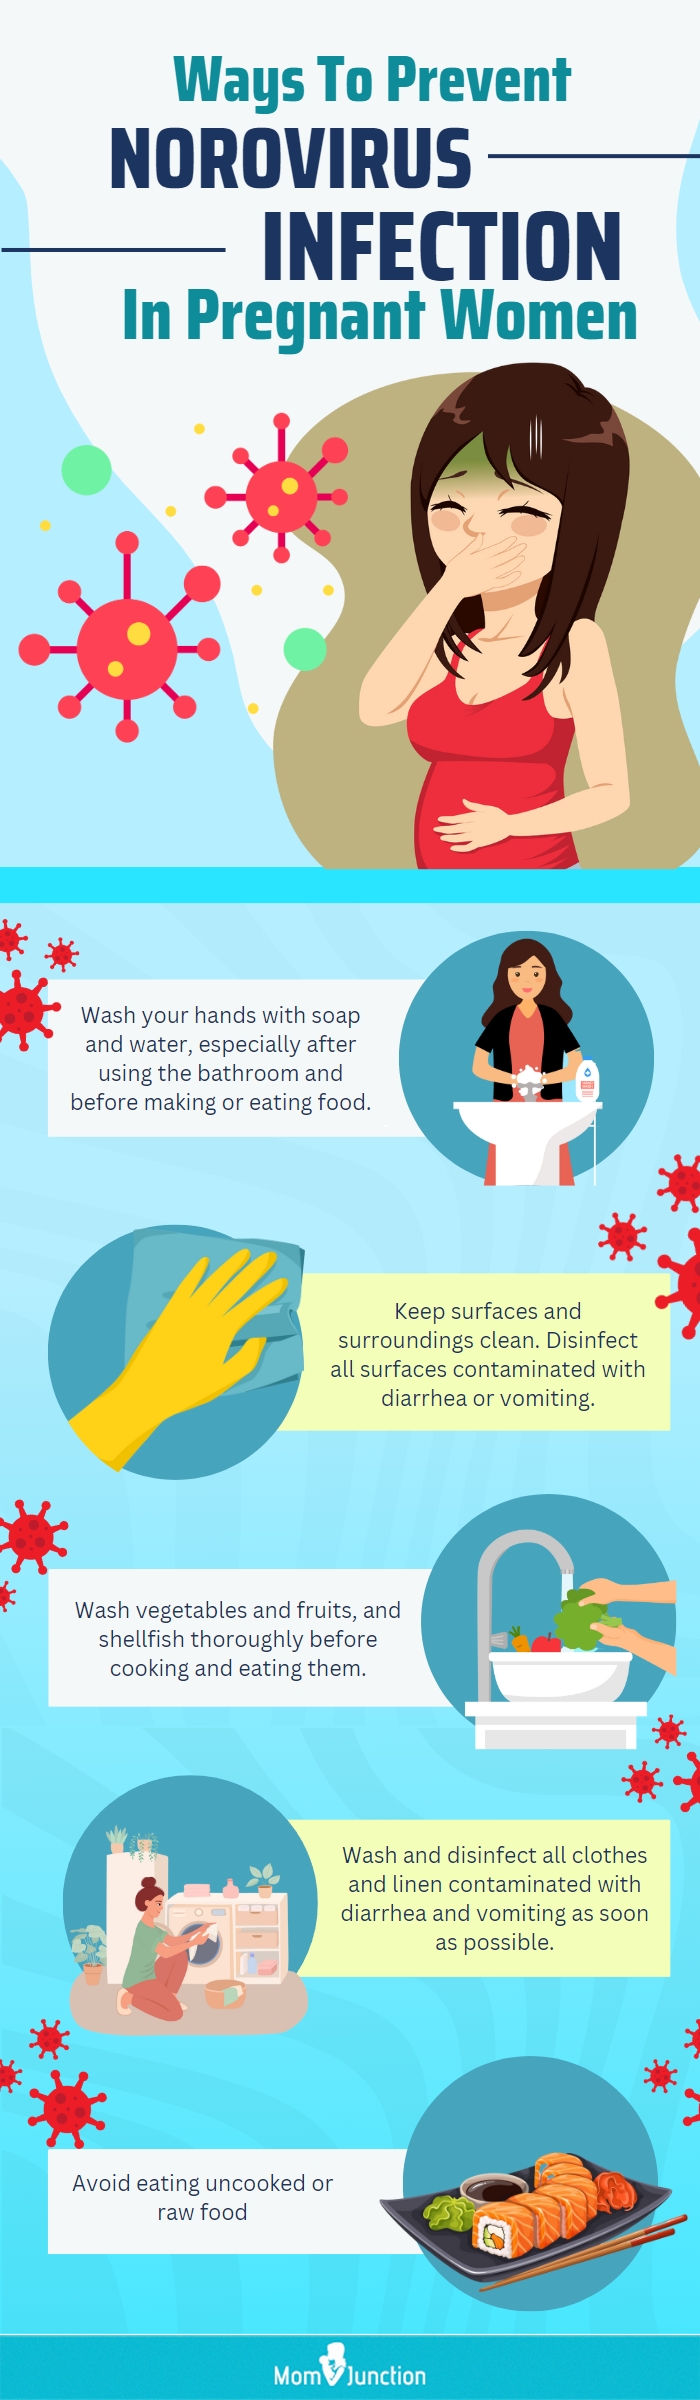 ways to prevent norovirus infection in pregnant women(infographic)